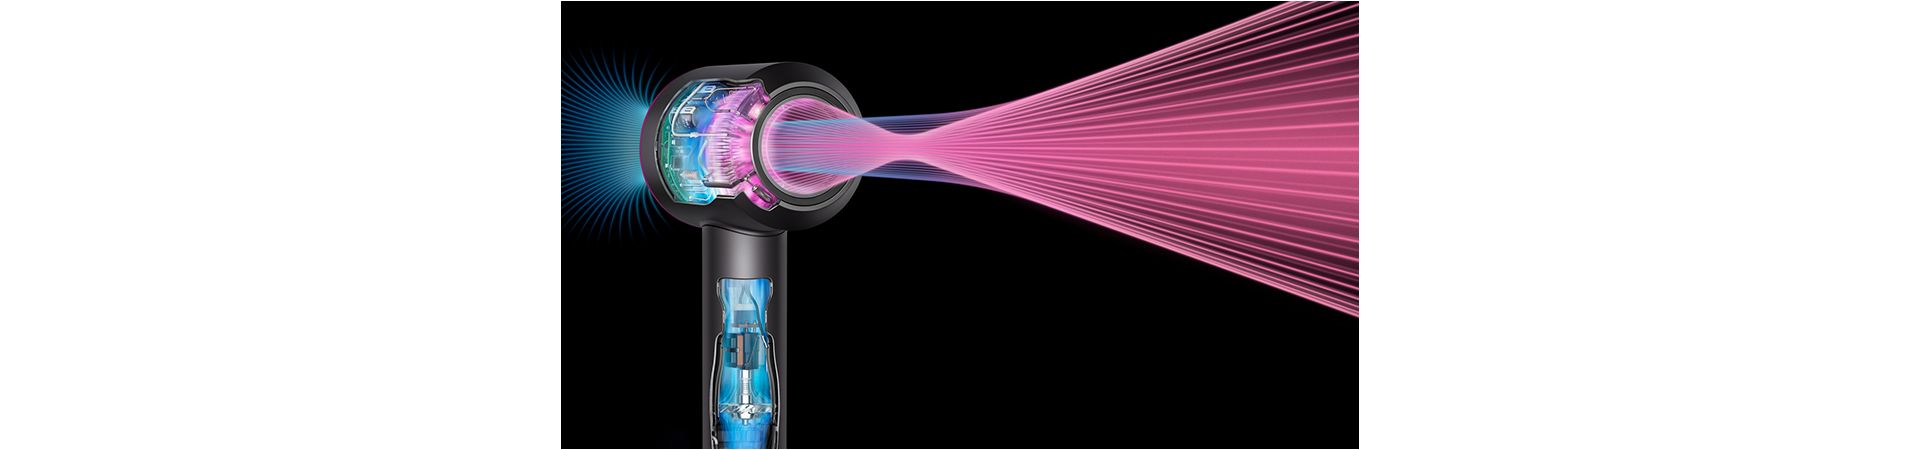 8. Dyson Supersonic Hair Dryer in Blue - wide 2